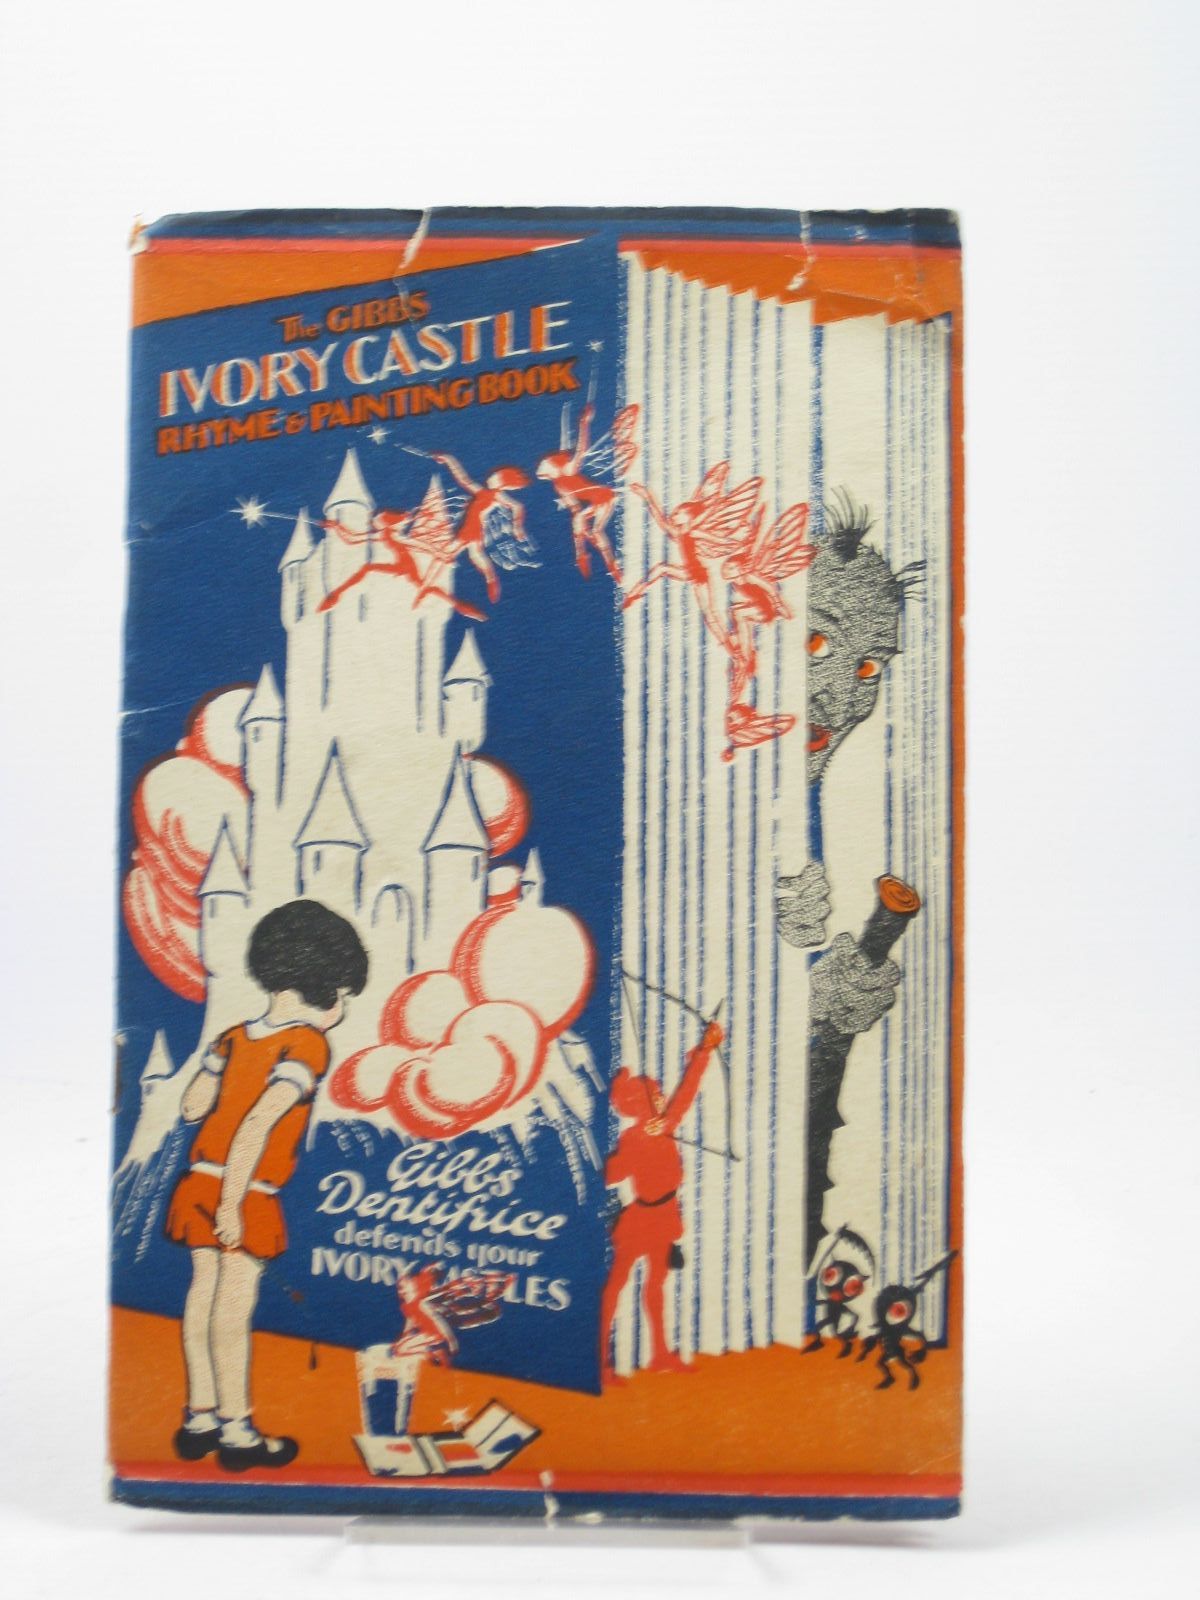 Photo of THE IVORY CASTLE RHYME AND PAINTING BOOK published by D. & W. Gibbs Ltd. (STOCK CODE: 1502436)  for sale by Stella & Rose's Books